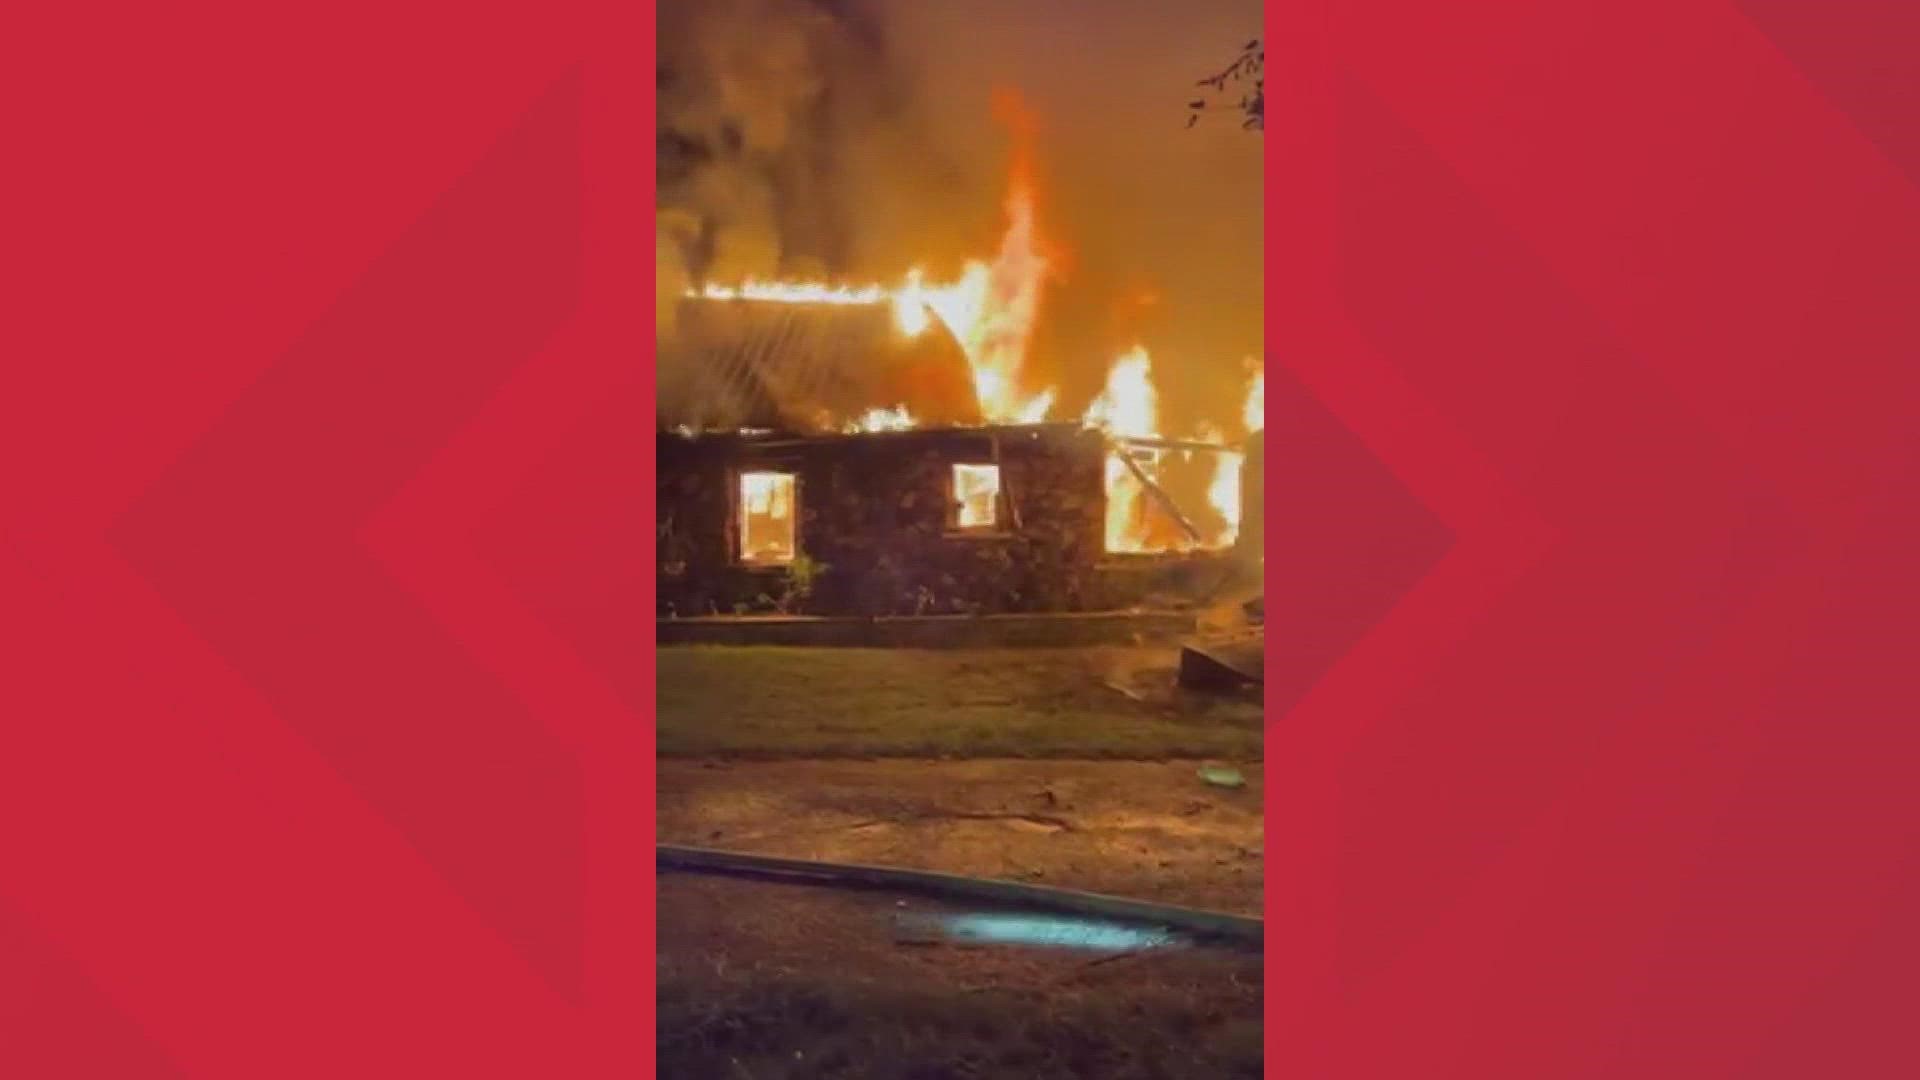 At least one person is dead after a house fire that happened between Lakemoore Drive and Fielden Sroe Road near Highway 92 around 10:30 p.m. Saturday night.